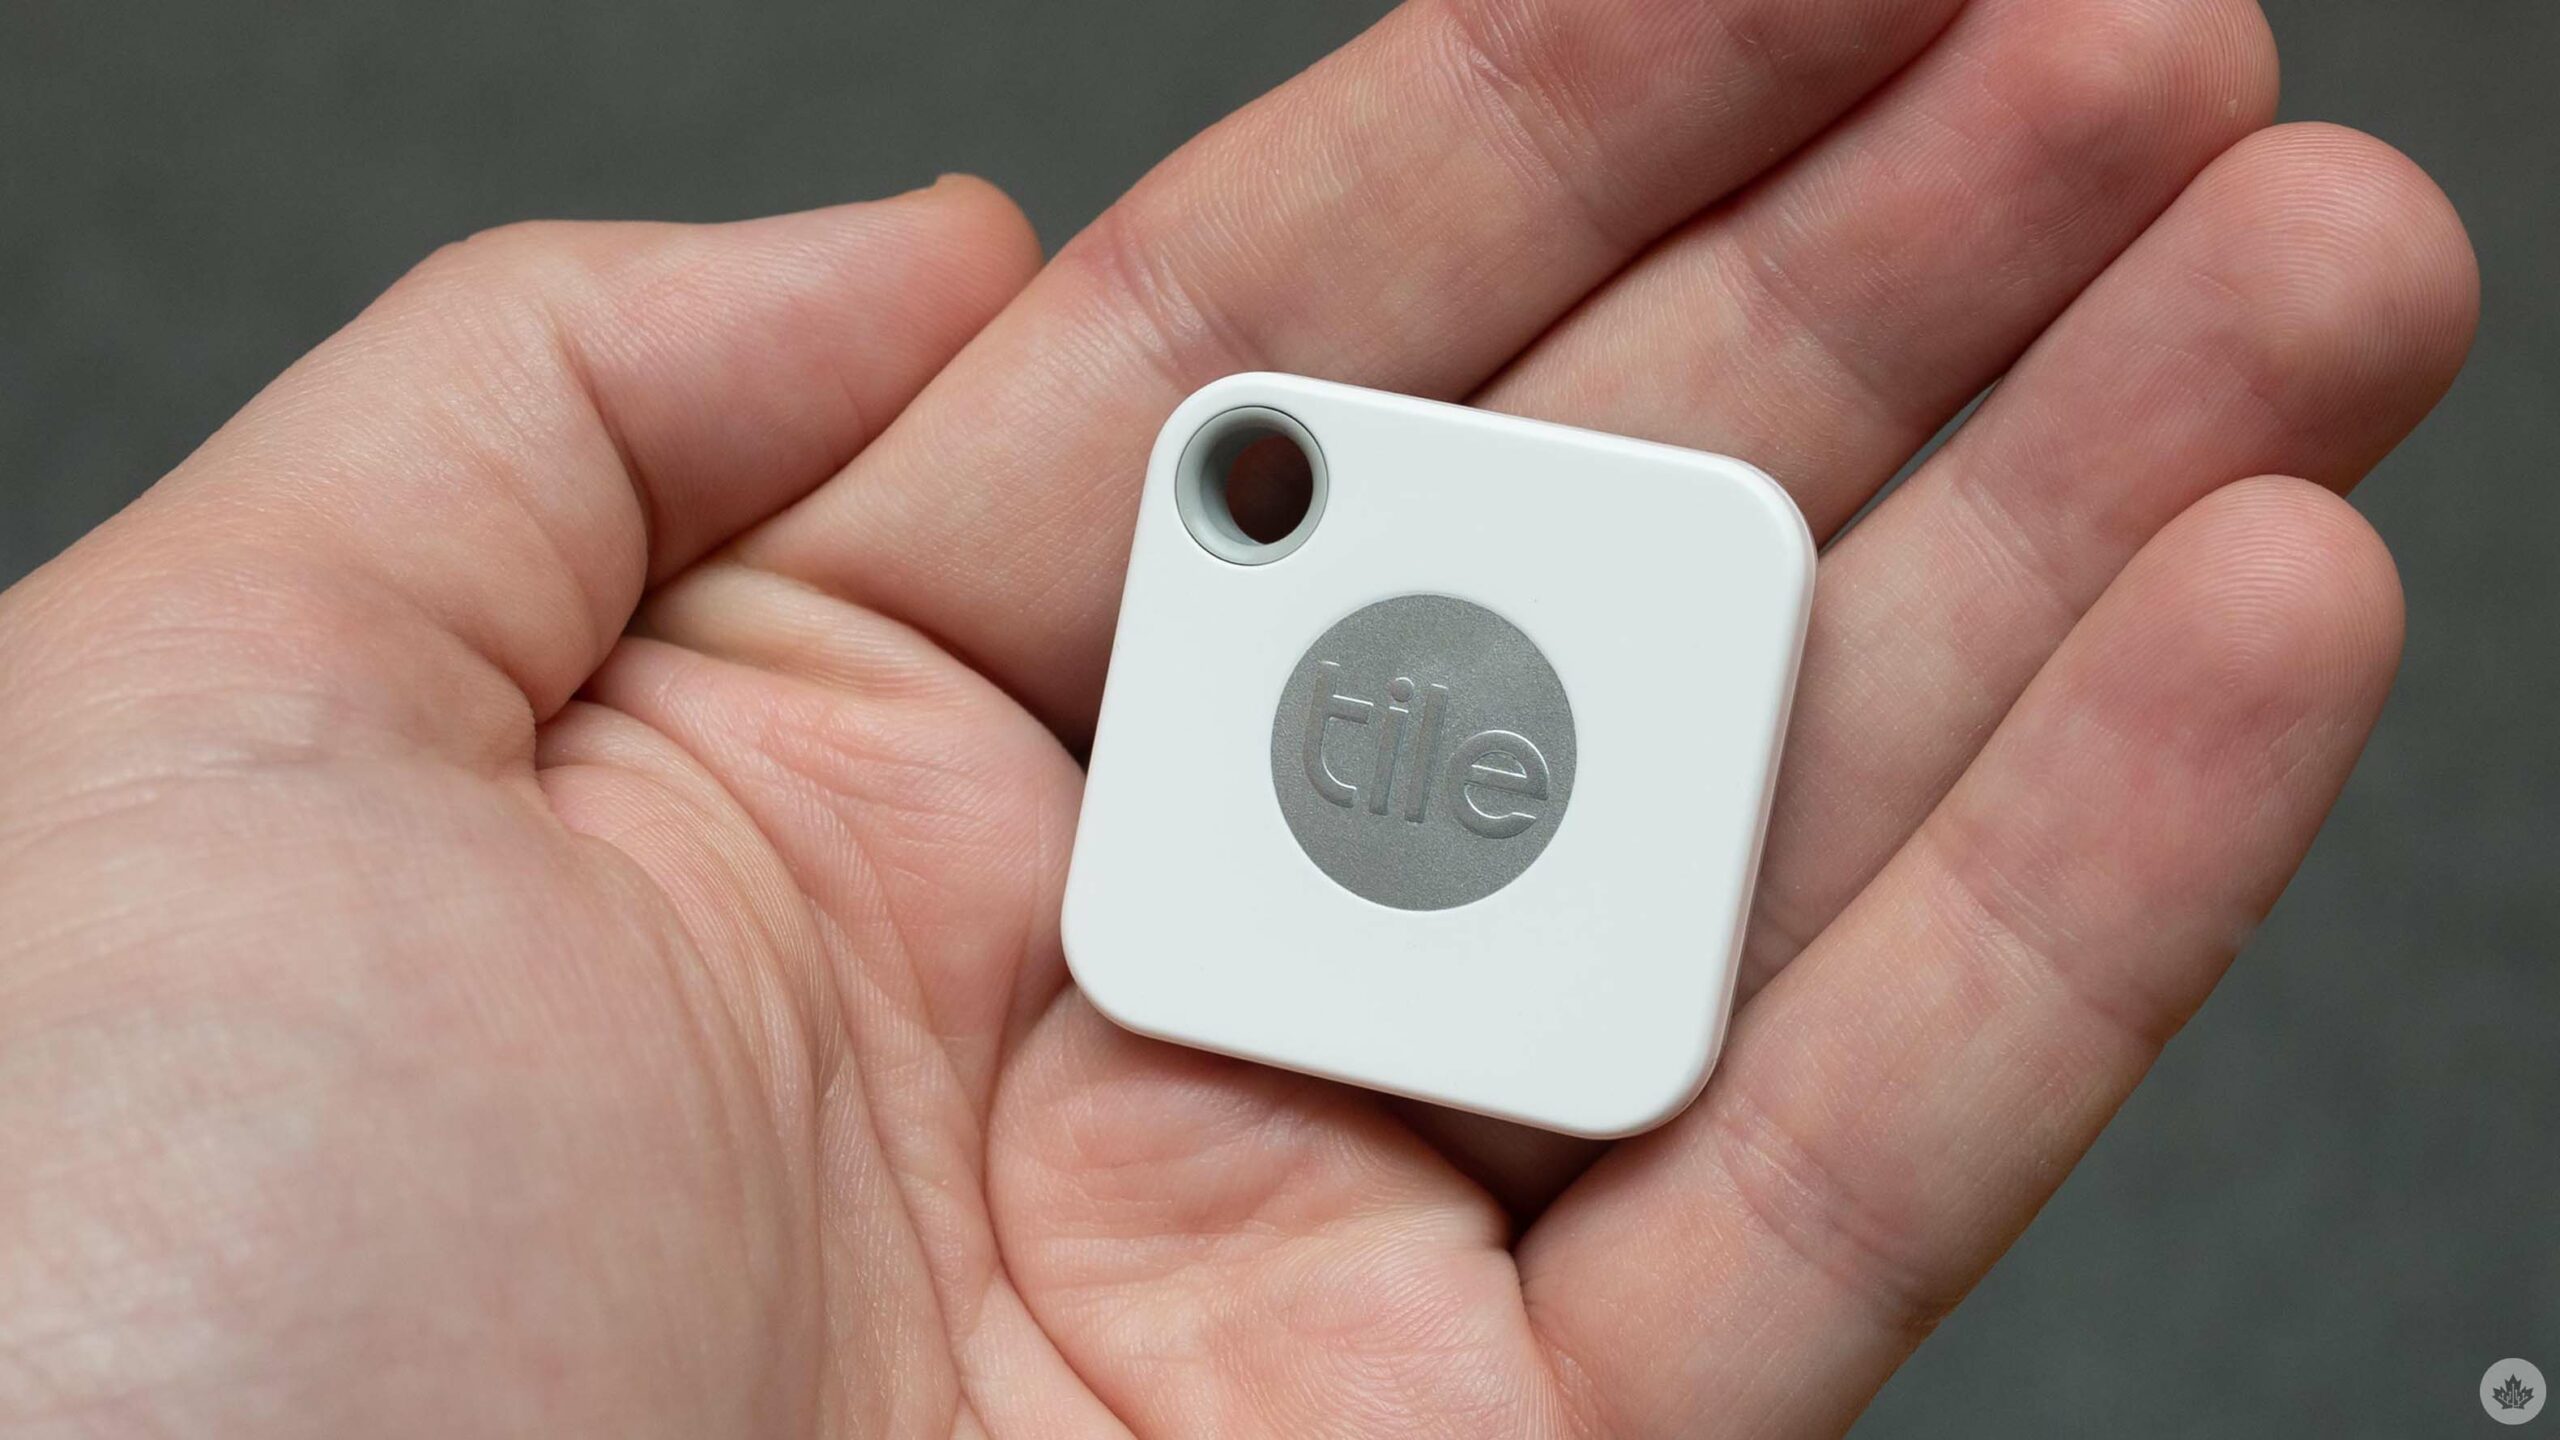 Tile threatens $1 million fine for doing crimes with Bluetooth trackers